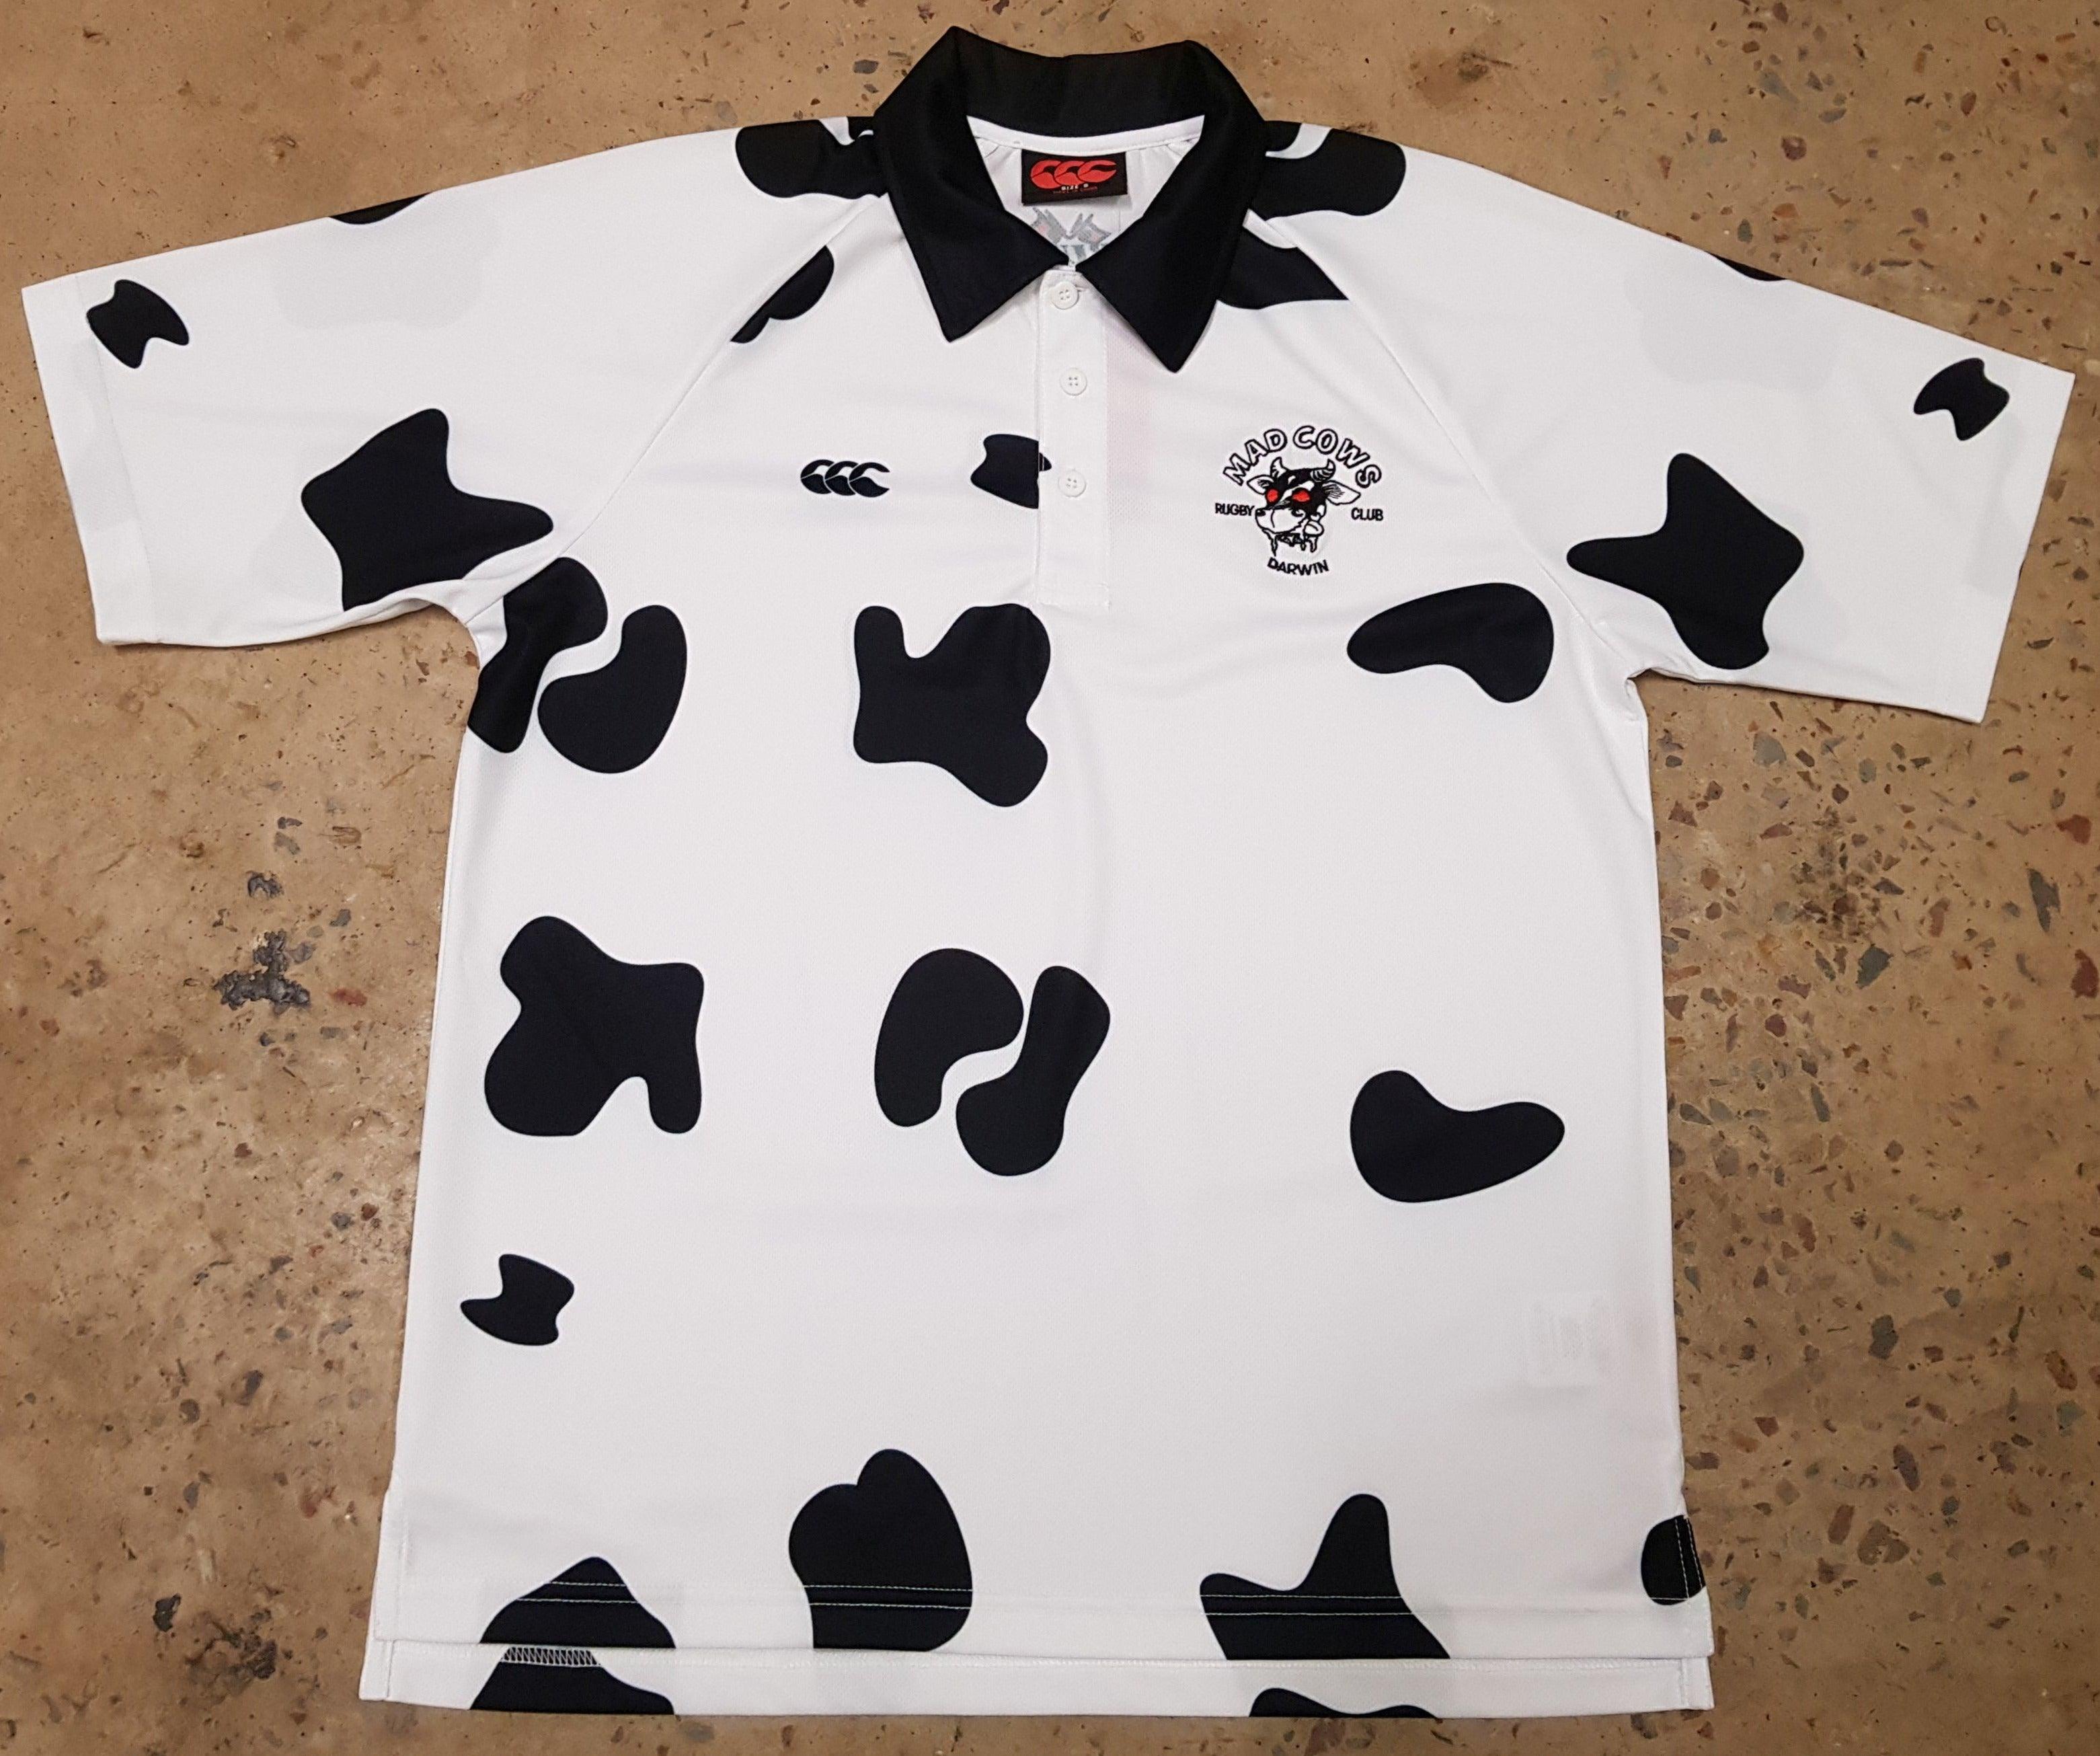 Mad Cows Polo - The Rugby Shop Darwin